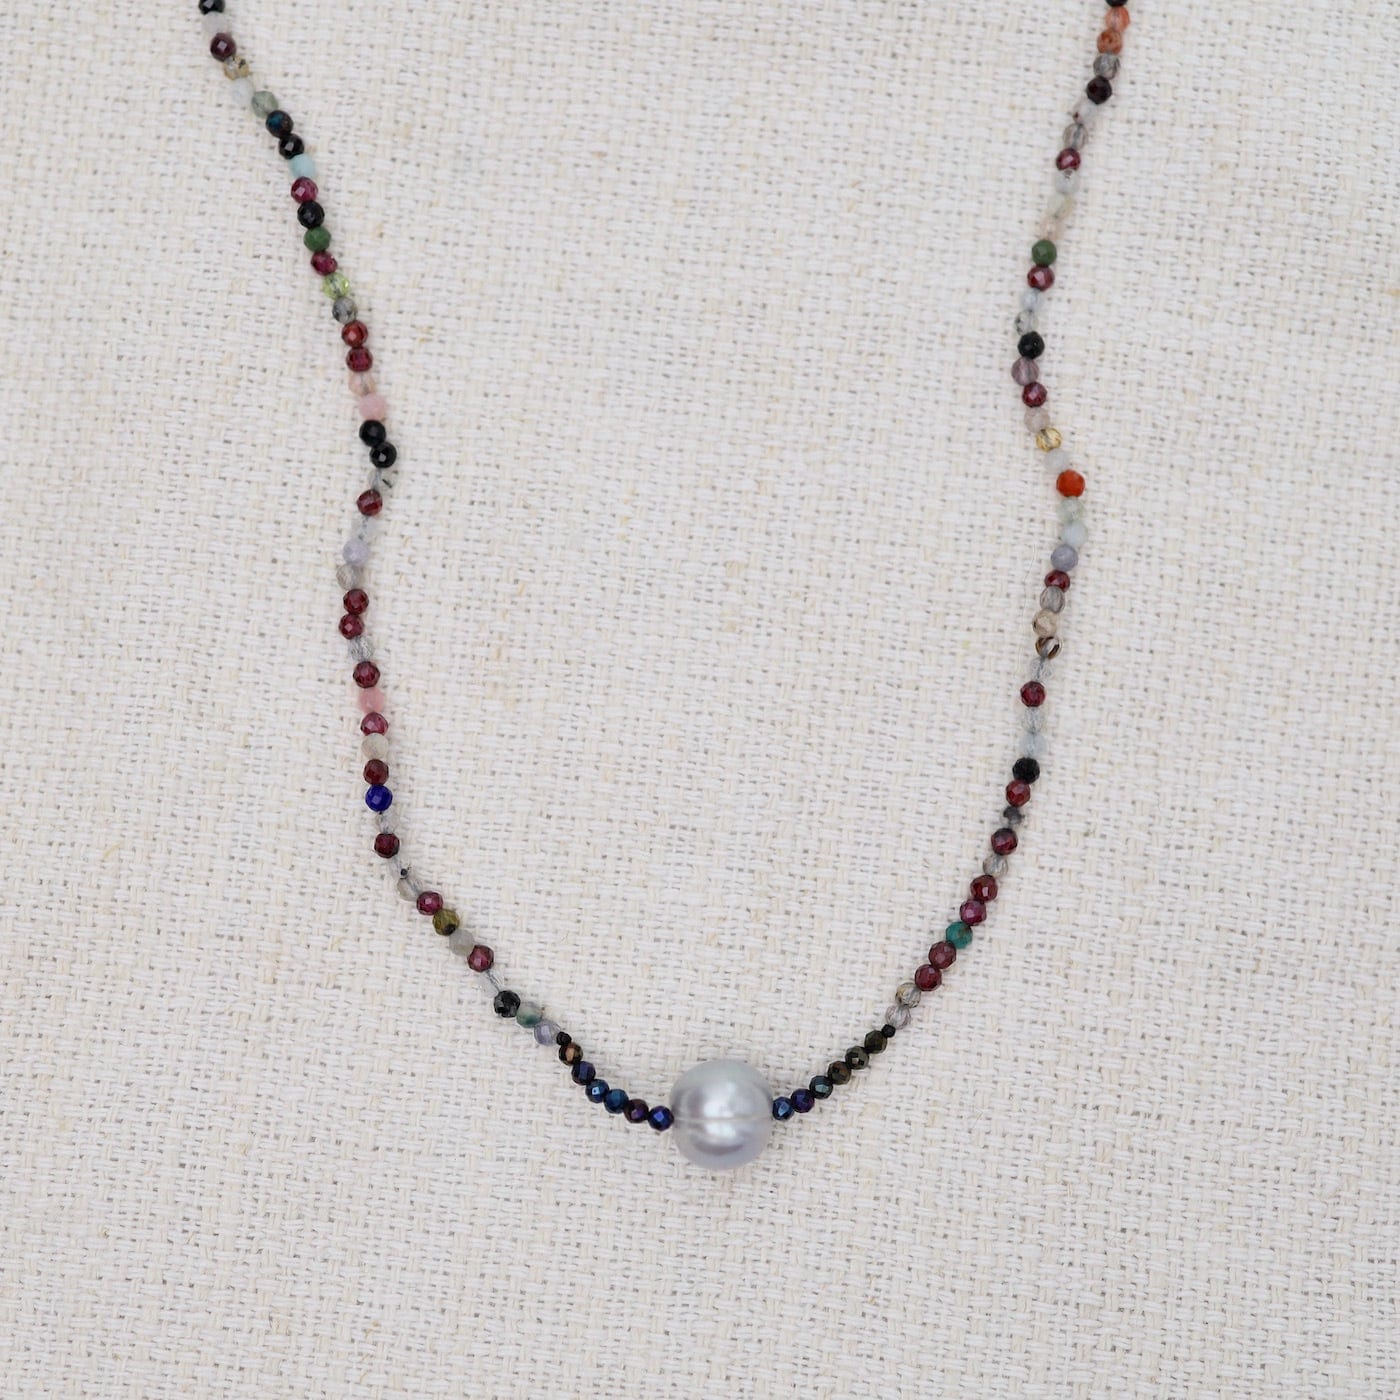 NKL Mixed Stone with Grey Pearl Necklace